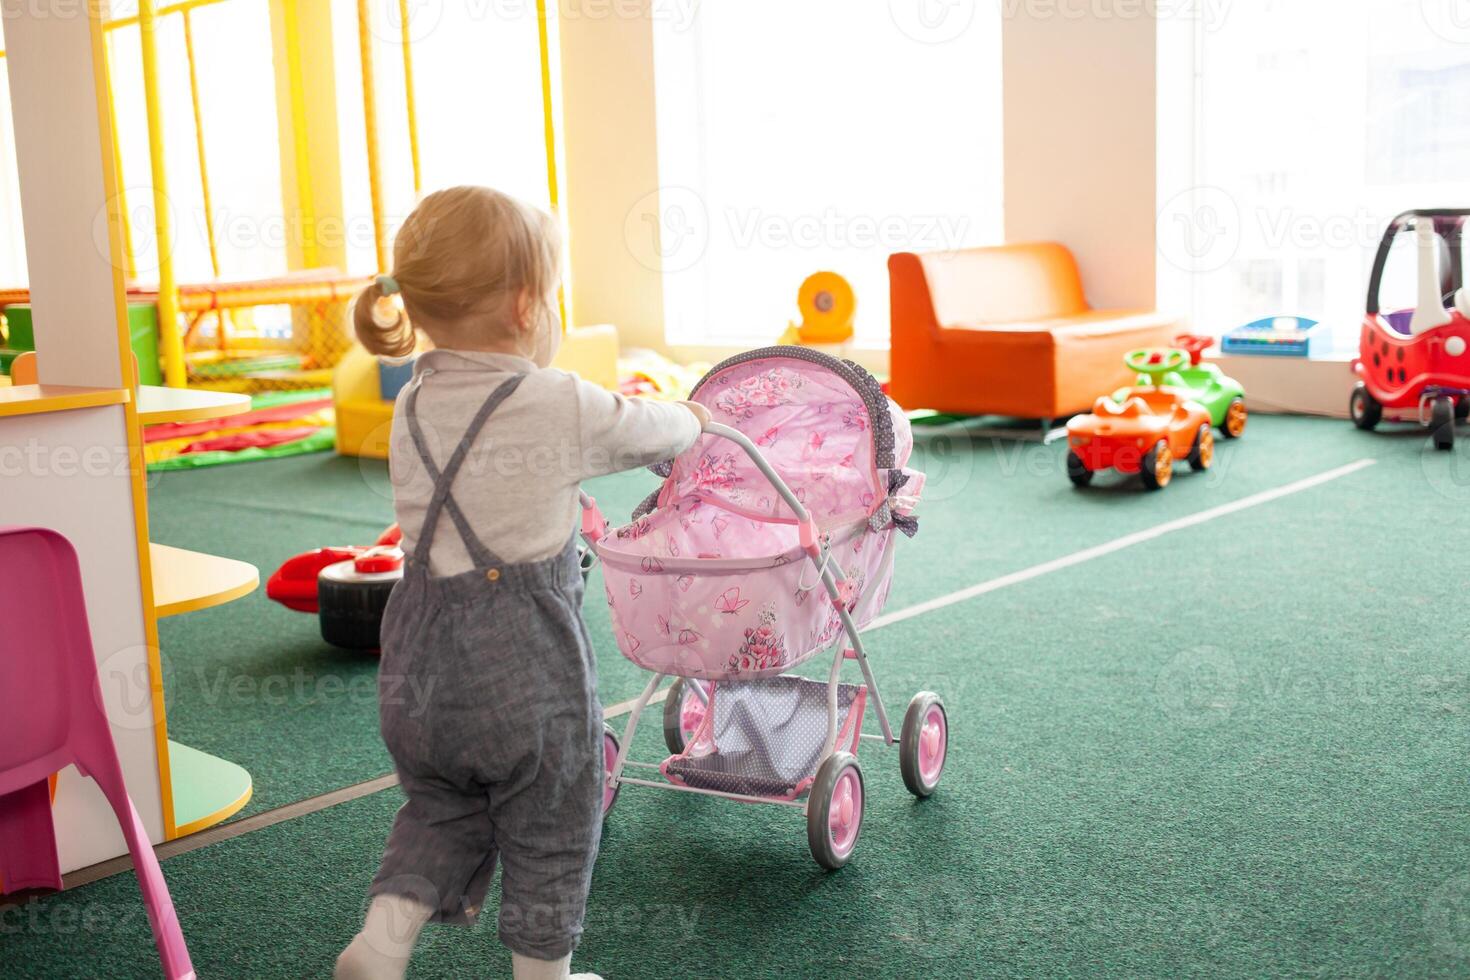 A small two-year-old girl plays with toys in the playroom photo